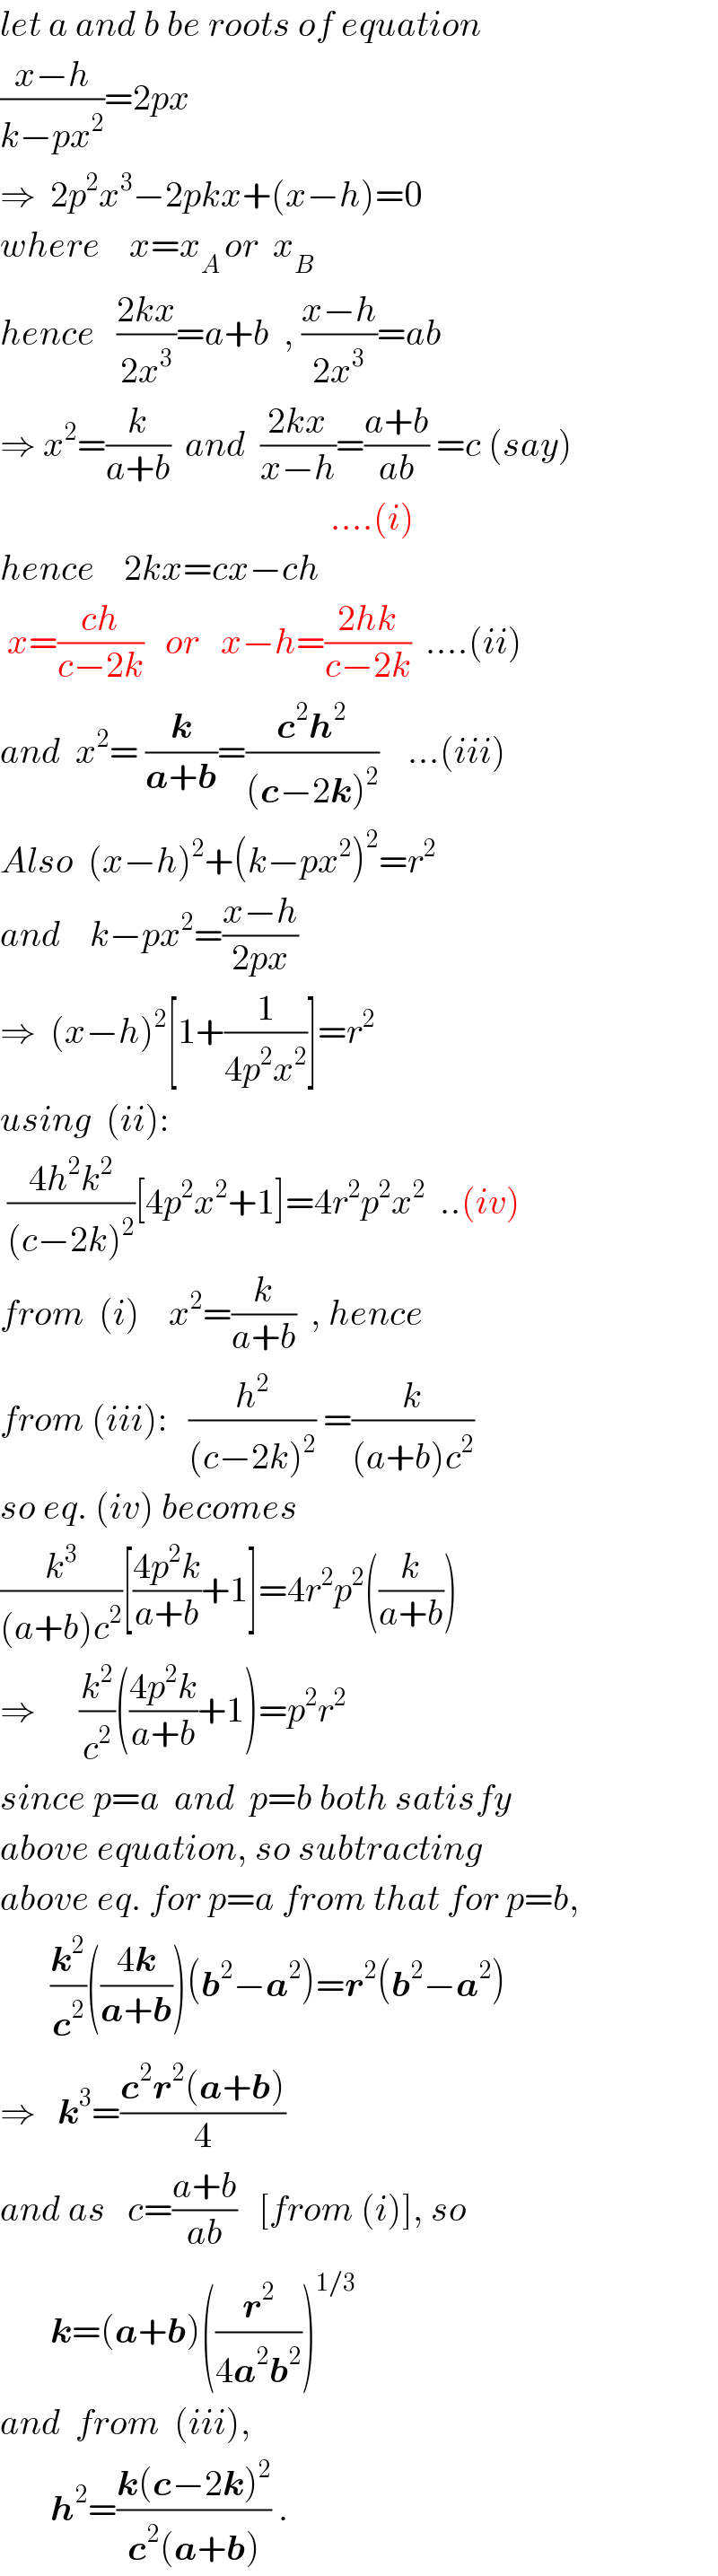 let a and b be roots of equation  ((x−h)/(k−px^2 ))=2px       ⇒  2p^2 x^3 −2pkx+(x−h)=0  where    x=x_(A ) or  x_B    hence   ((2kx)/(2x^3 ))=a+b  , ((x−h)/(2x^3 ))=ab  ⇒ x^2 =(k/(a+b))  and  ((2kx)/(x−h))=((a+b)/(ab)) =c (say)                                                ....(i)  hence    2kx=cx−ch   x=((ch)/(c−2k))   or   x−h=((2hk)/(c−2k))  ....(ii)  and  x^2 = (k/(a+b))=((c^2 h^2 )/((c−2k)^2 ))    ...(iii)  Also  (x−h)^2 +(k−px^2 )^2 =r^2   and    k−px^2 =((x−h)/(2px))  ⇒  (x−h)^2 [1+(1/(4p^2 x^2 ))]=r^2   using  (ii):   ((4h^2 k^2 )/((c−2k)^2 ))[4p^2 x^2 +1]=4r^2 p^2 x^2   ..(iv)  from  (i)    x^2 =(k/(a+b))  , hence  from (iii):   (h^2 /((c−2k)^2 )) =(k/((a+b)c^2 ))  so eq. (iv) becomes  (k^3 /((a+b)c^2 ))[((4p^2 k)/(a+b))+1]=4r^2 p^2 ((k/(a+b)))  ⇒      (k^2 /c^2 )(((4p^2 k)/(a+b))+1)=p^2 r^2   since p=a  and  p=b both satisfy  above equation, so subtracting  above eq. for p=a from that for p=b,         (k^2 /c^2 )(((4k)/(a+b)))(b^2 −a^2 )=r^2 (b^2 −a^2 )  ⇒   k^3 =((c^2 r^2 (a+b))/4)  and as   c=((a+b)/(ab))   [from (i)], so         k=(a+b)((r^2 /(4a^2 b^2 )))^(1/3)   and  from  (iii),         h^2 =((k(c−2k)^2 )/(c^2 (a+b))) .  